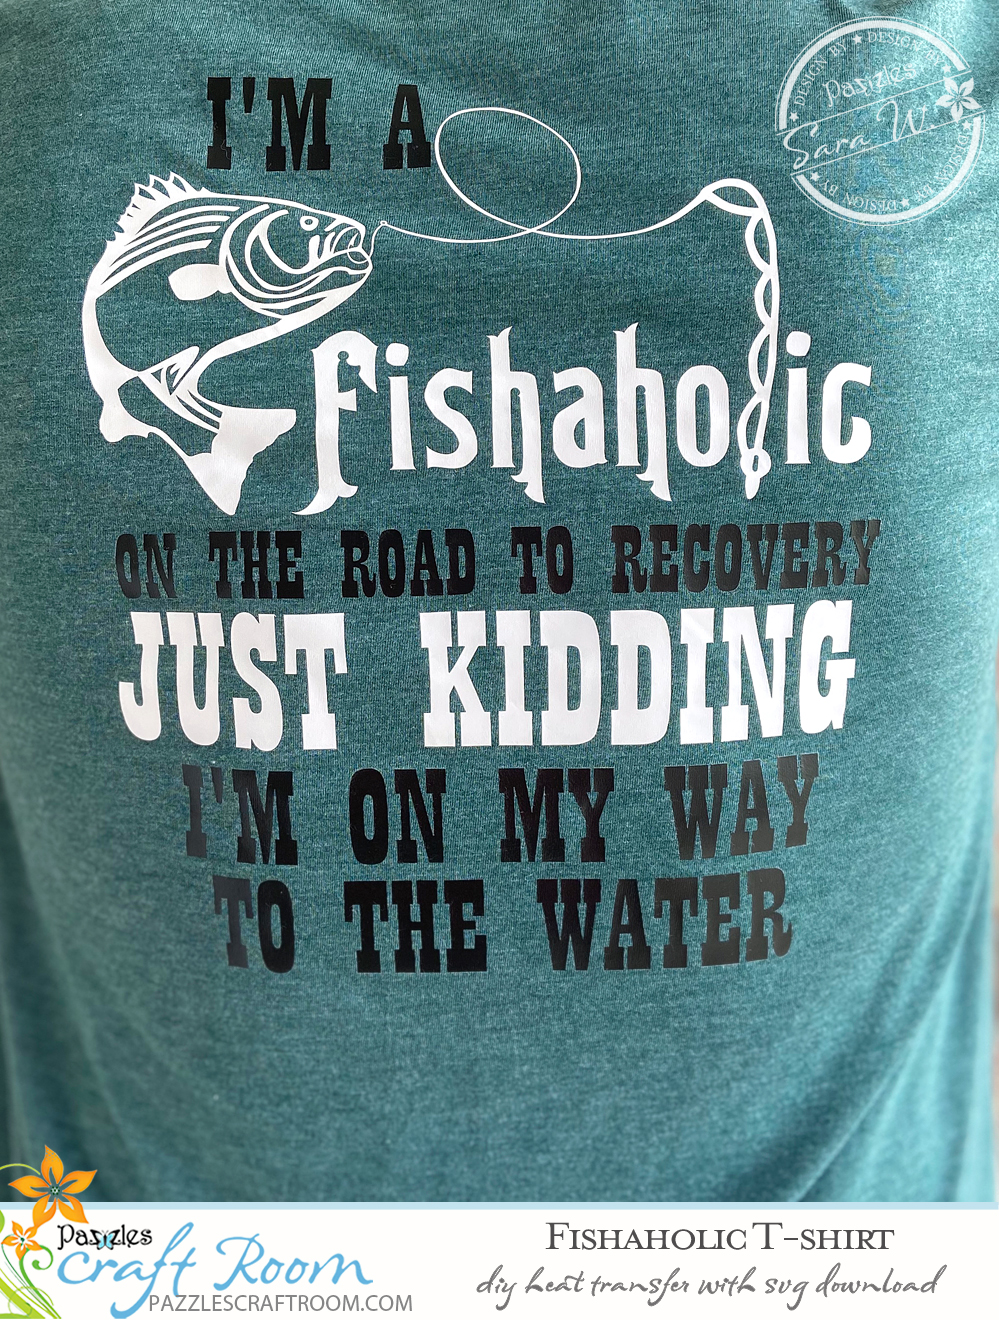 Pazzles Fishaholic DIY Fishing T-shirt with instant SVG download. Instant SVG download compatible with all major electronic cutters including Pazzles Inspiration, Cricut, and Silhouette Cameo. Design by Sara Weber.